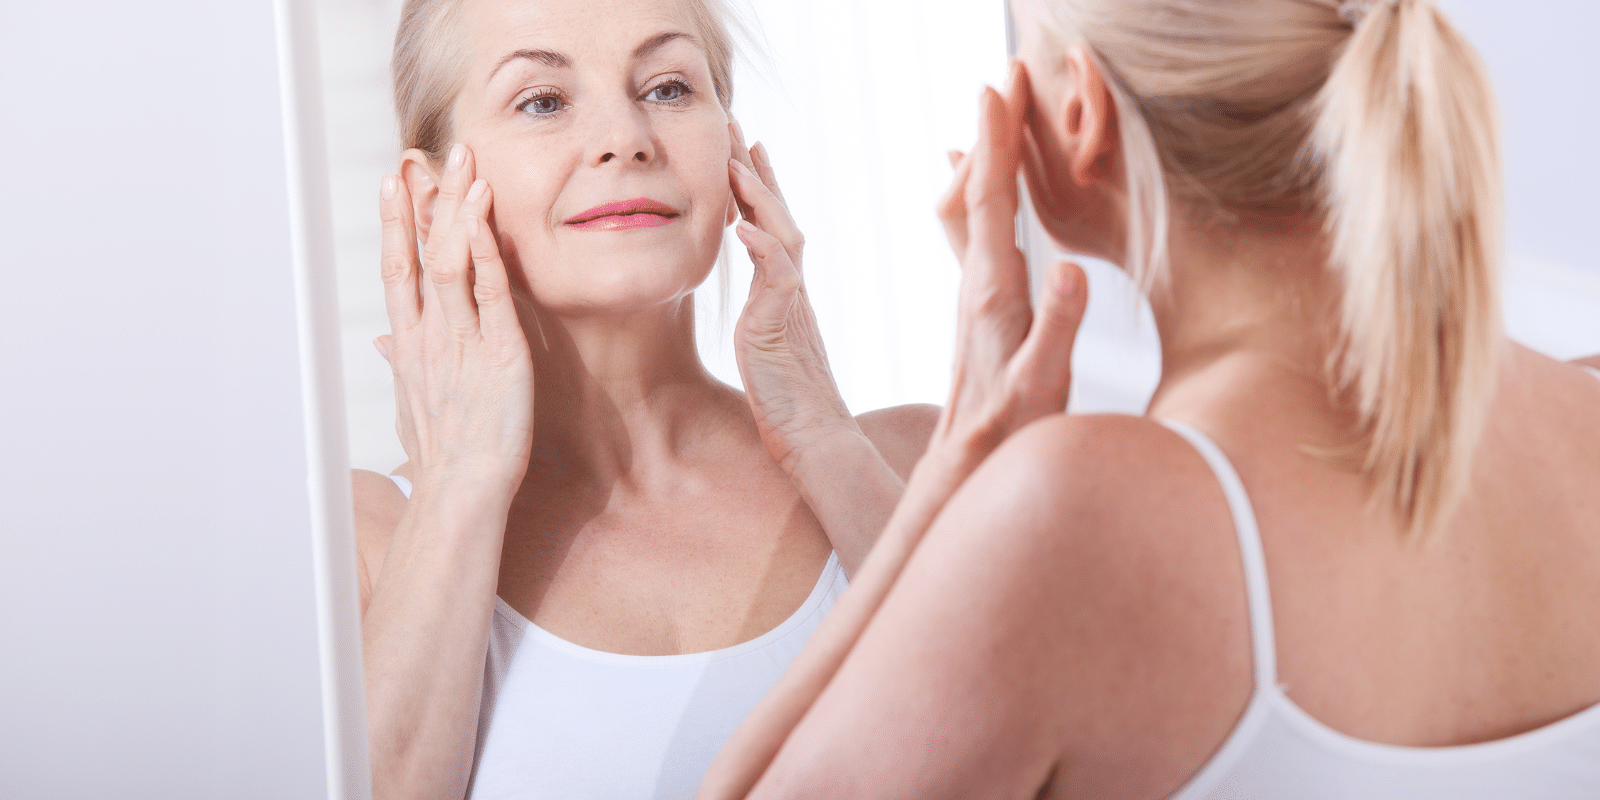 Collagen production slows down as we age.